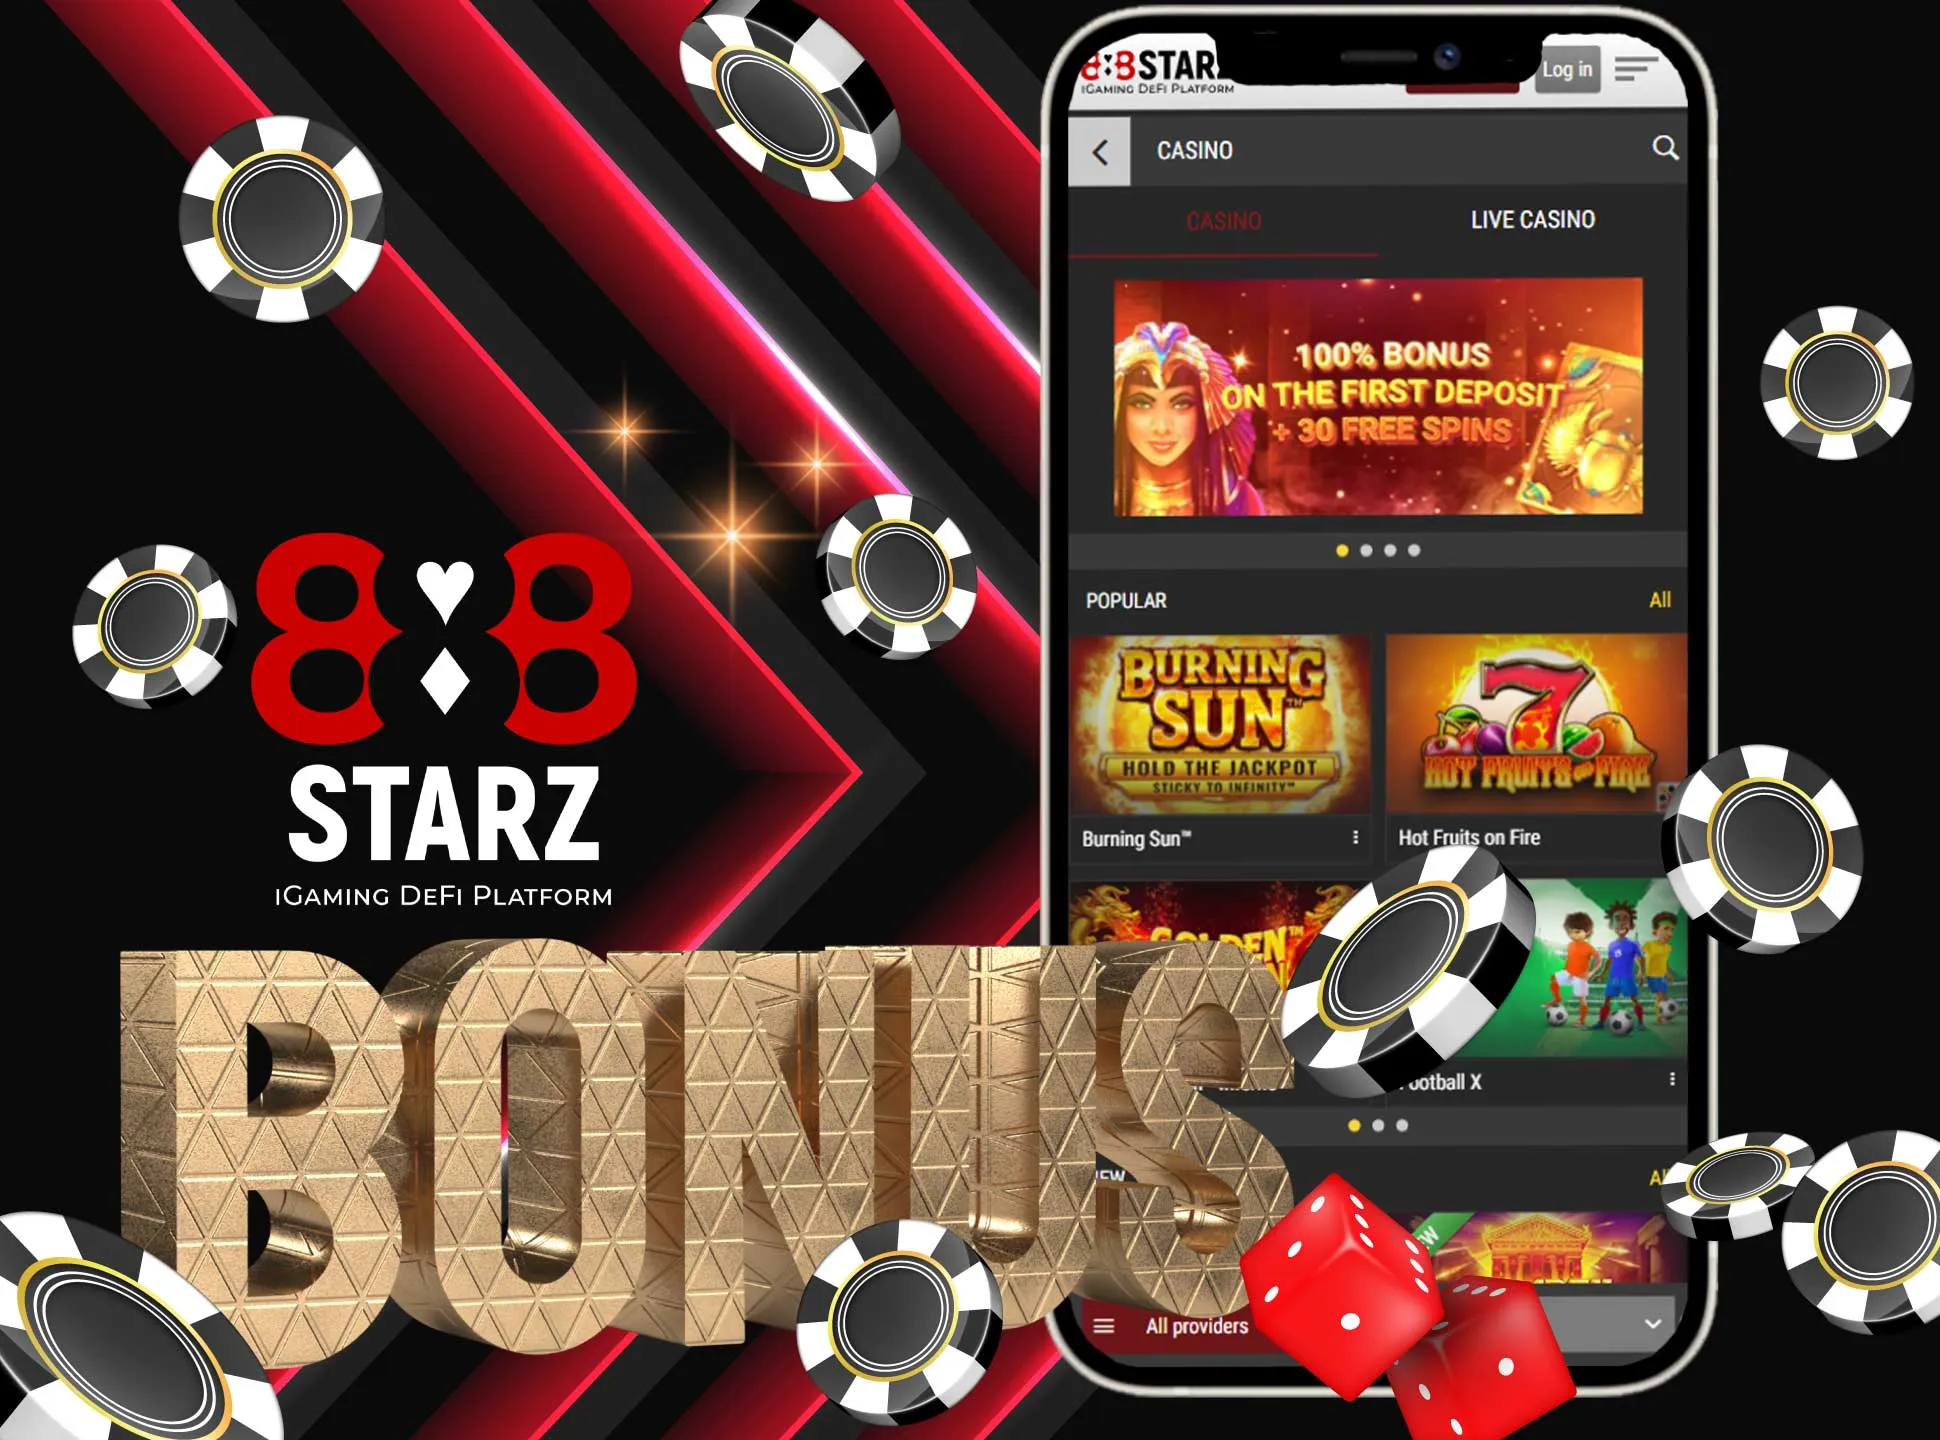 Get up to 140,000 BDT for casino games.